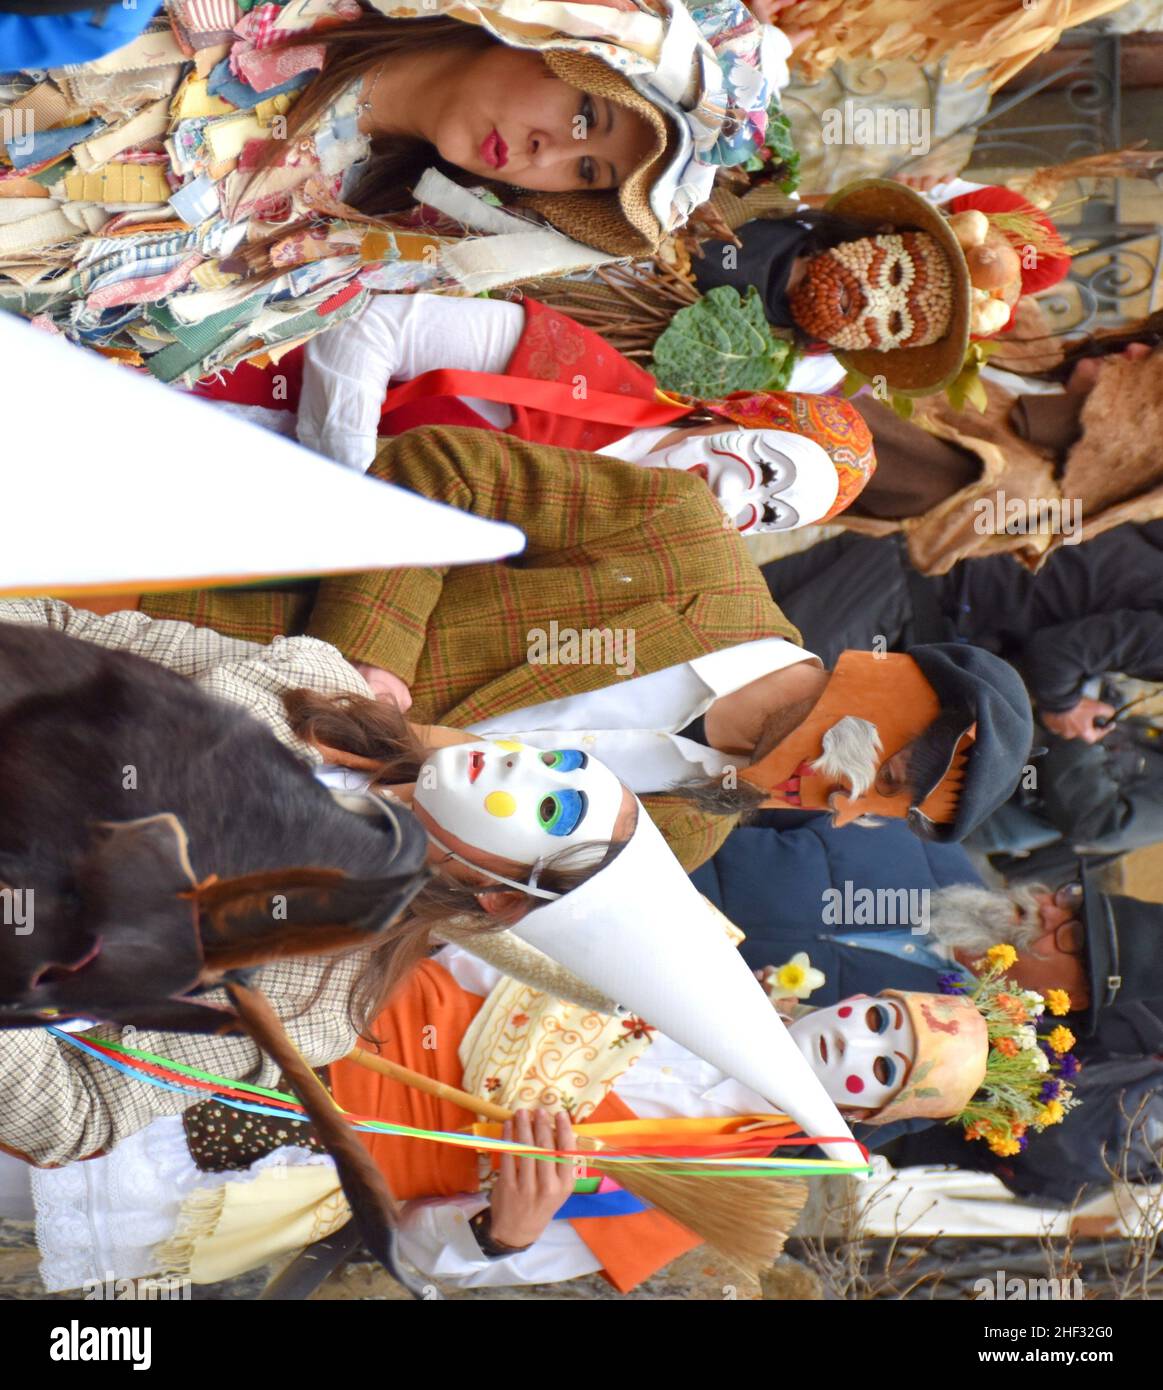 Enciso, Spain - February 29, 2020: Different ancestral costumes of the traditional carnival of the village of Enciso. Stock Photo